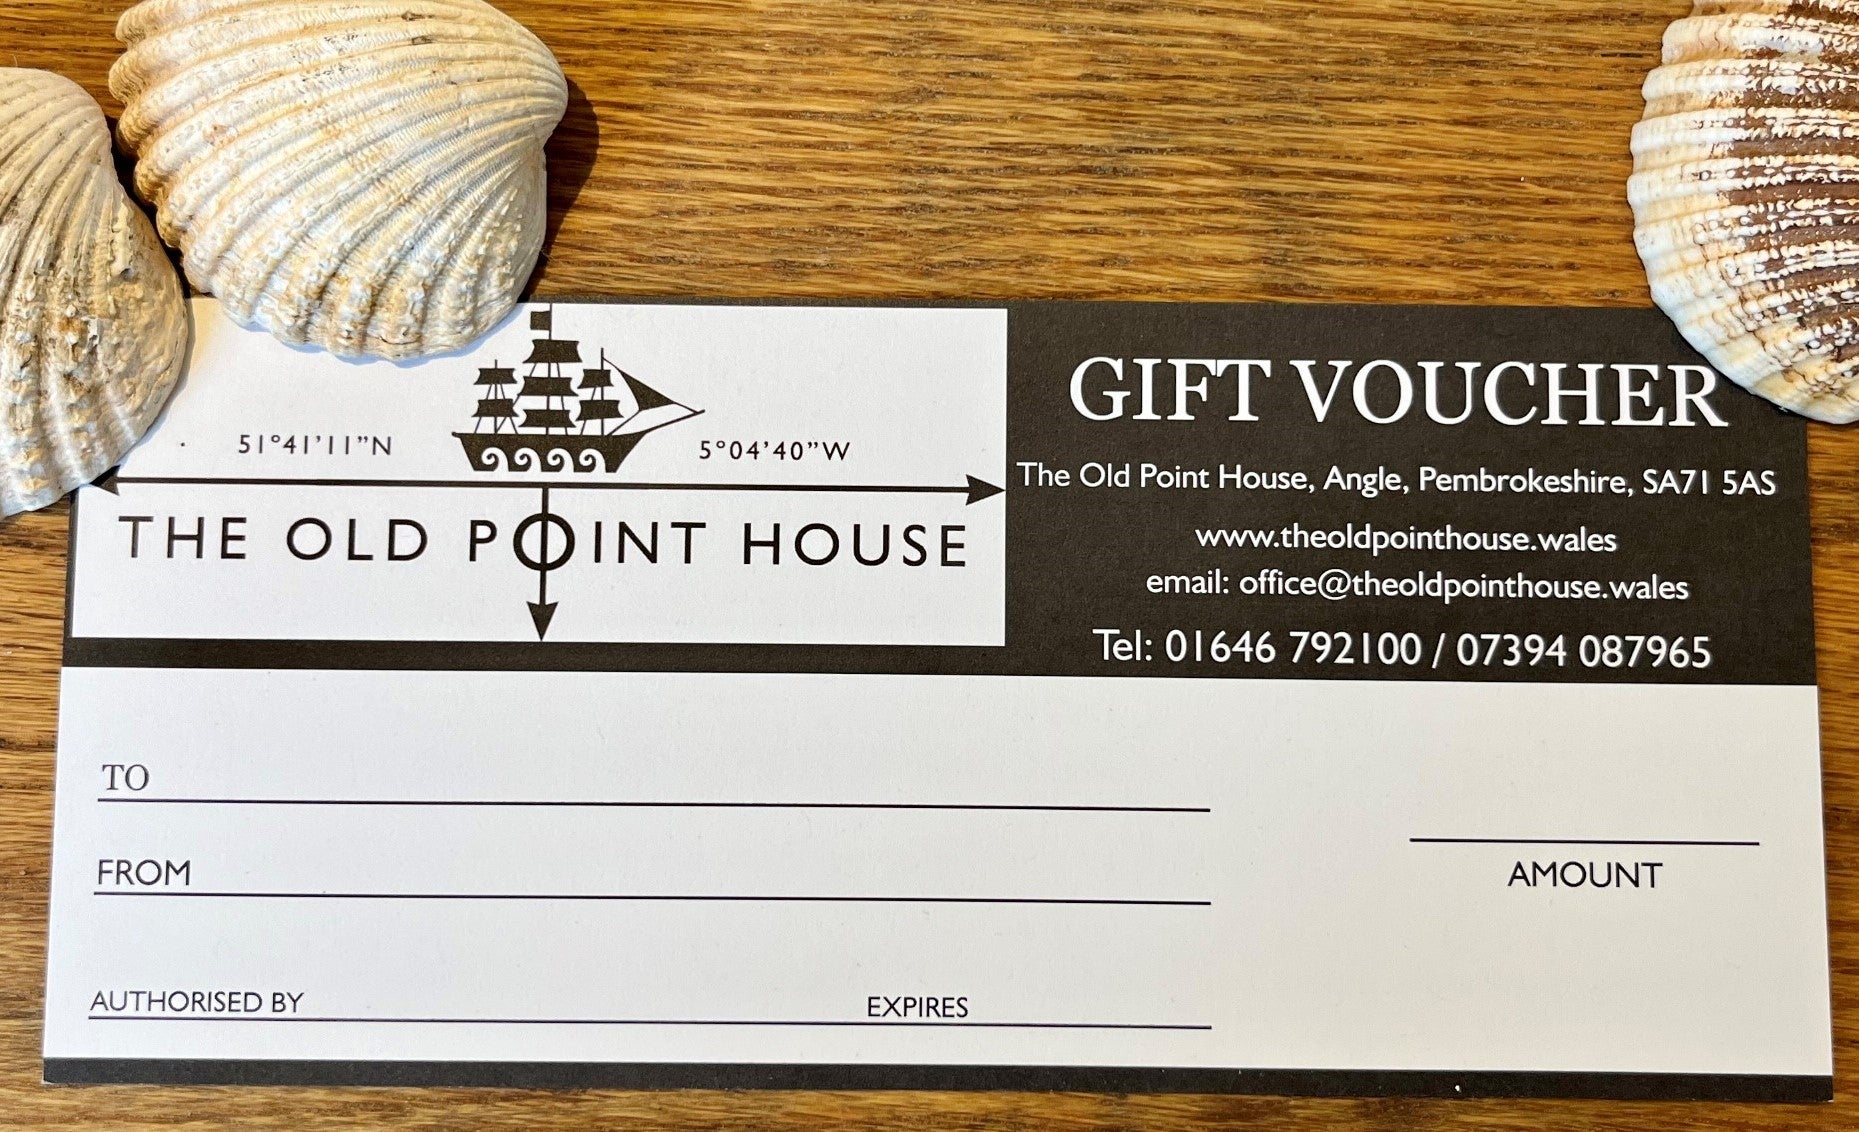 The Old Point House Voucher